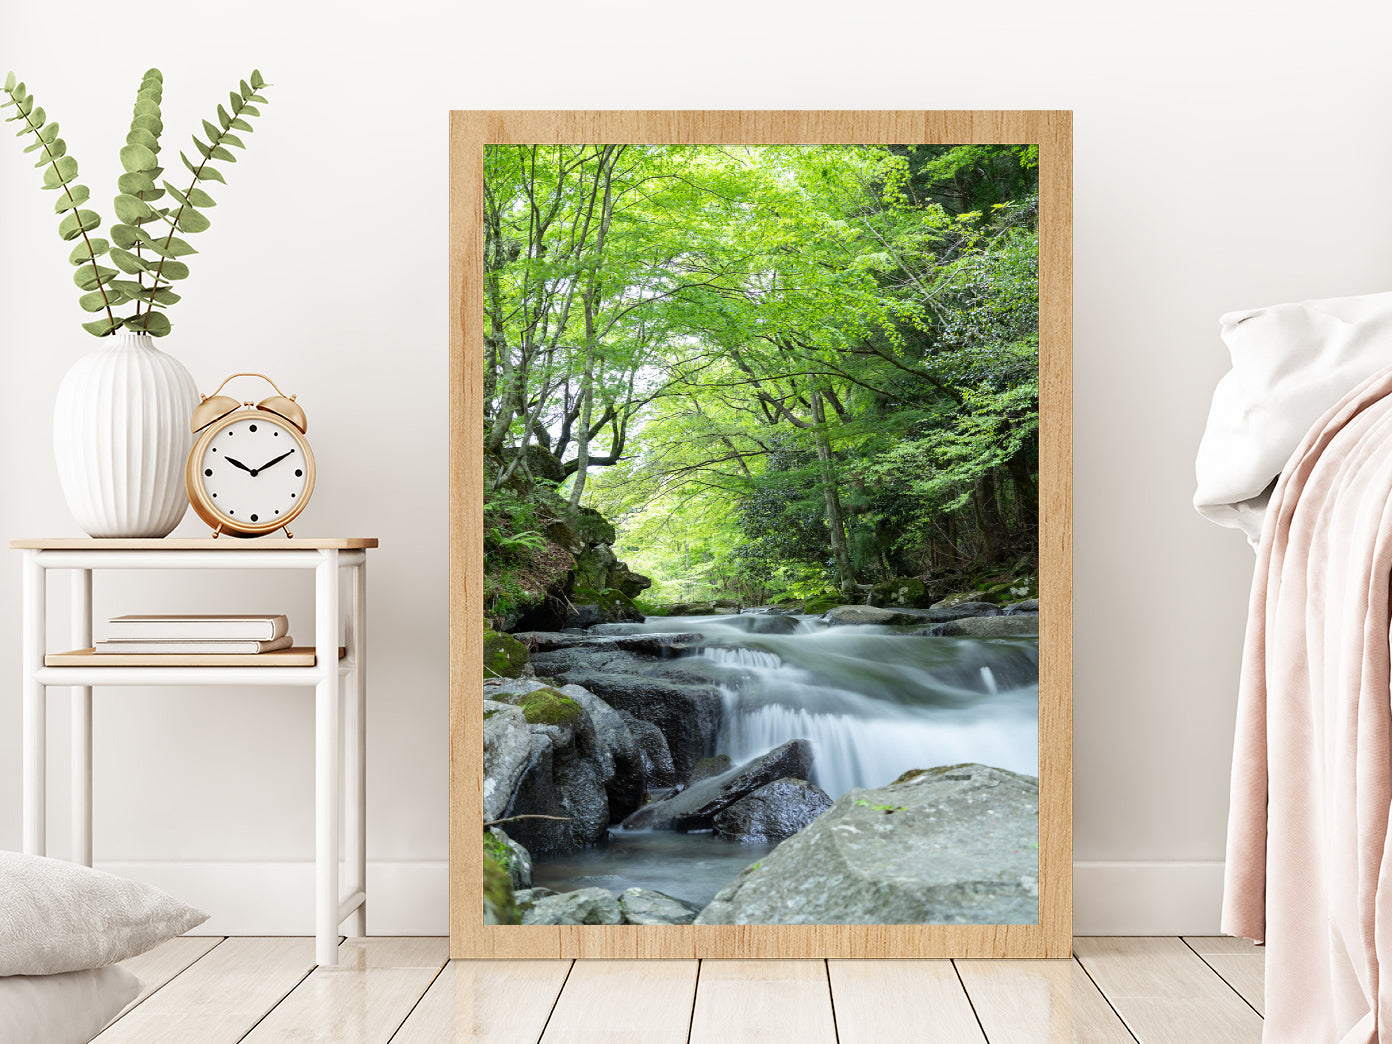 Rocky Riverside With Forest Glass Framed Wall Art, Ready to Hang Quality Print Without White Border Oak